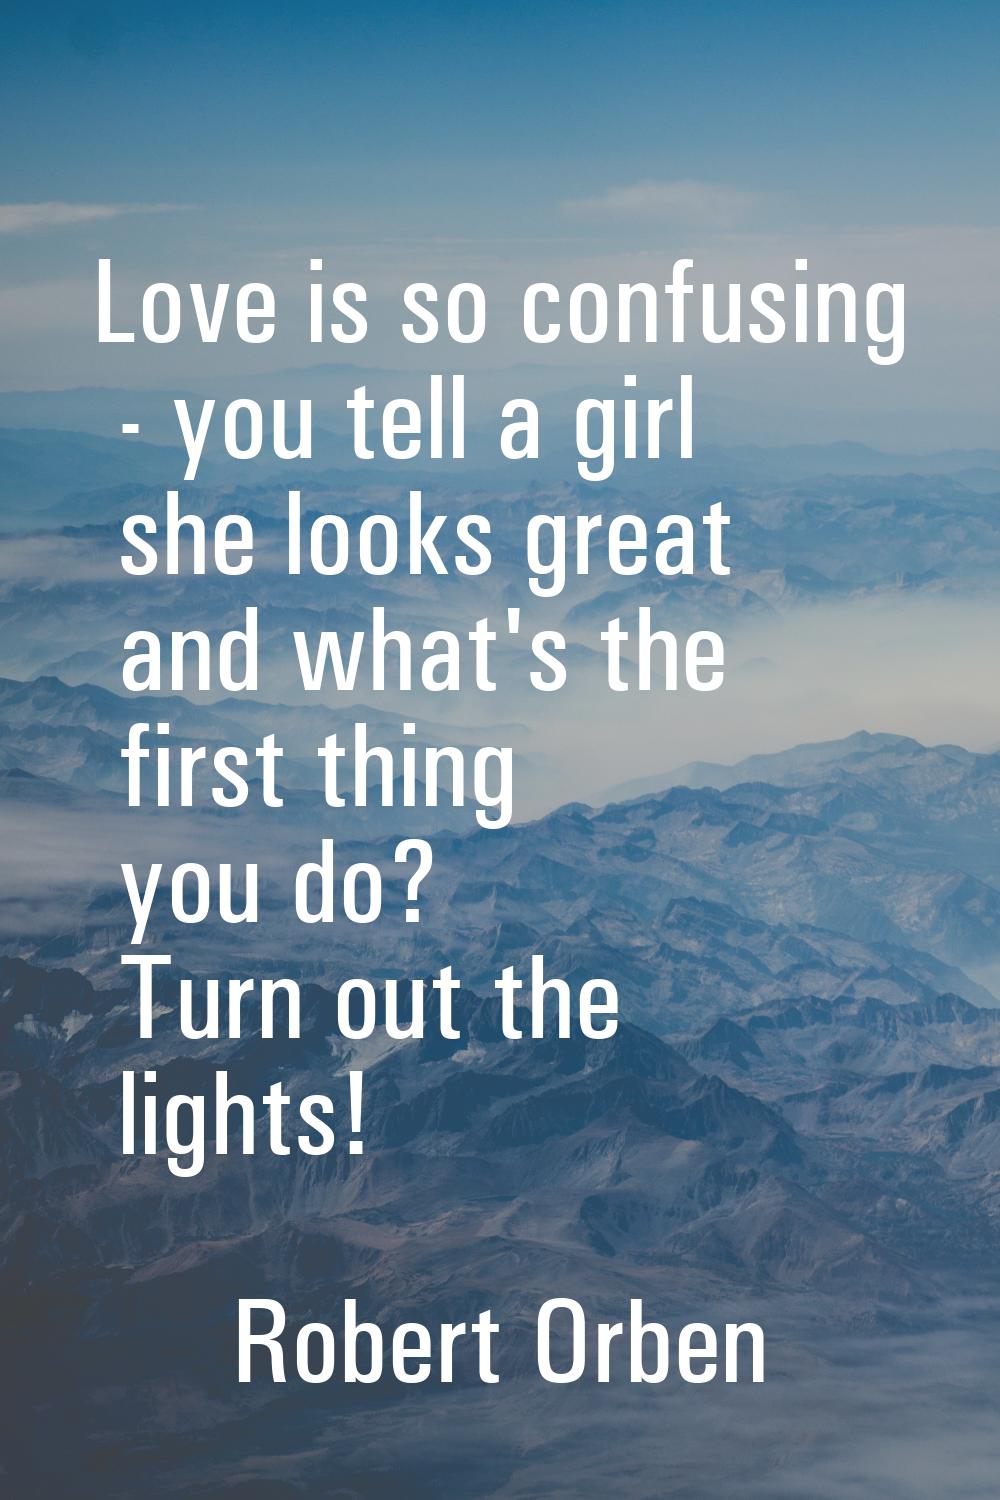 Love is so confusing - you tell a girl she looks great and what's the first thing you do? Turn out 